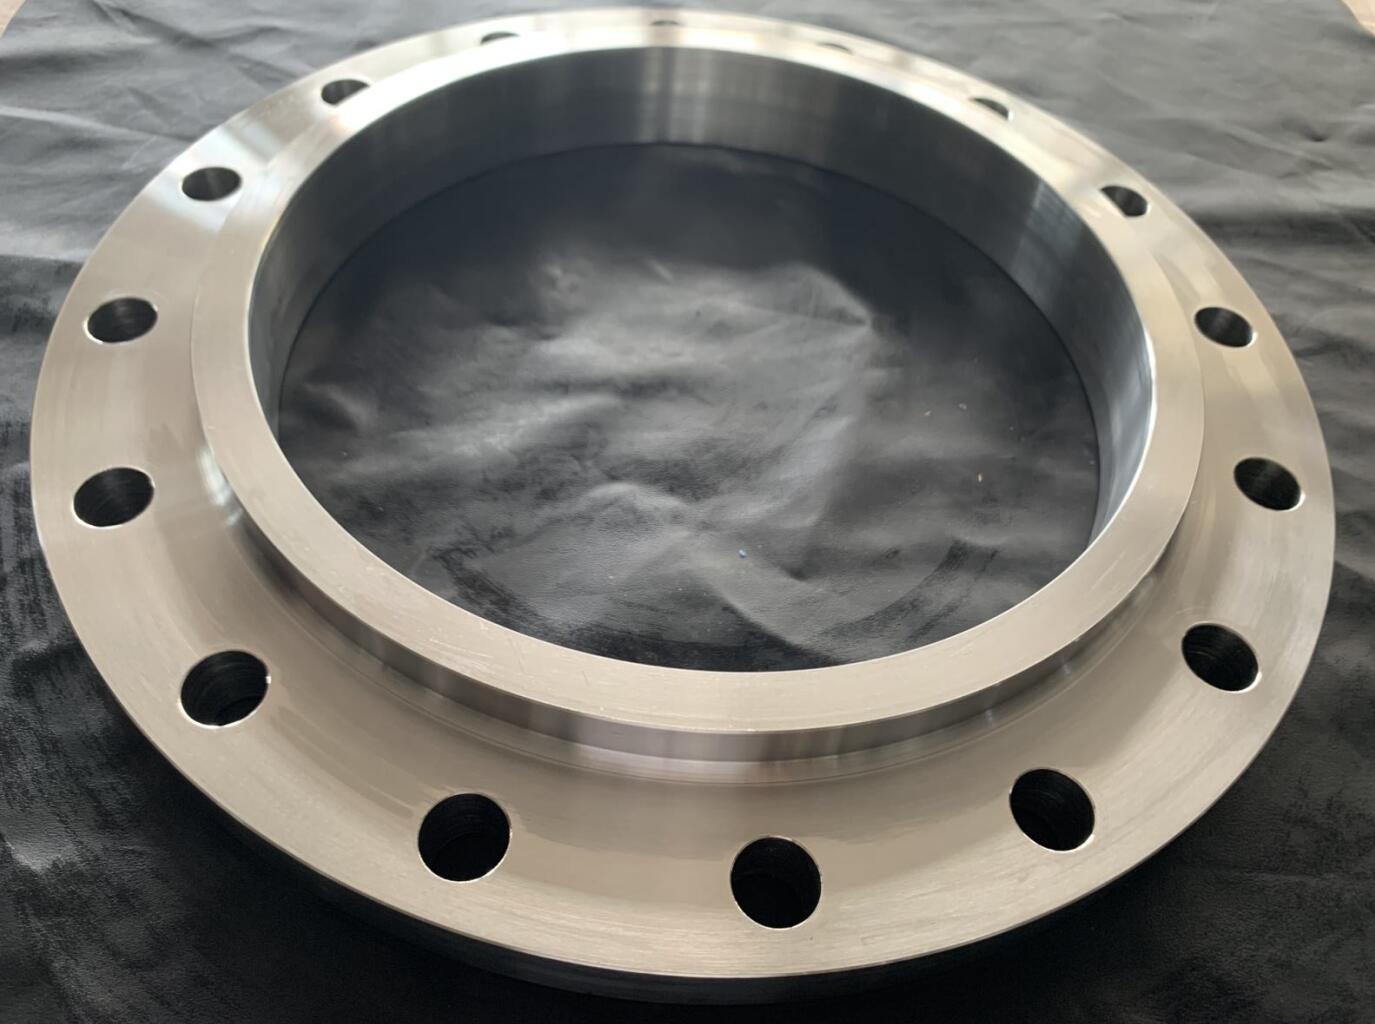 ANSI B16.5 Stainless Steel Forged Welded Flange